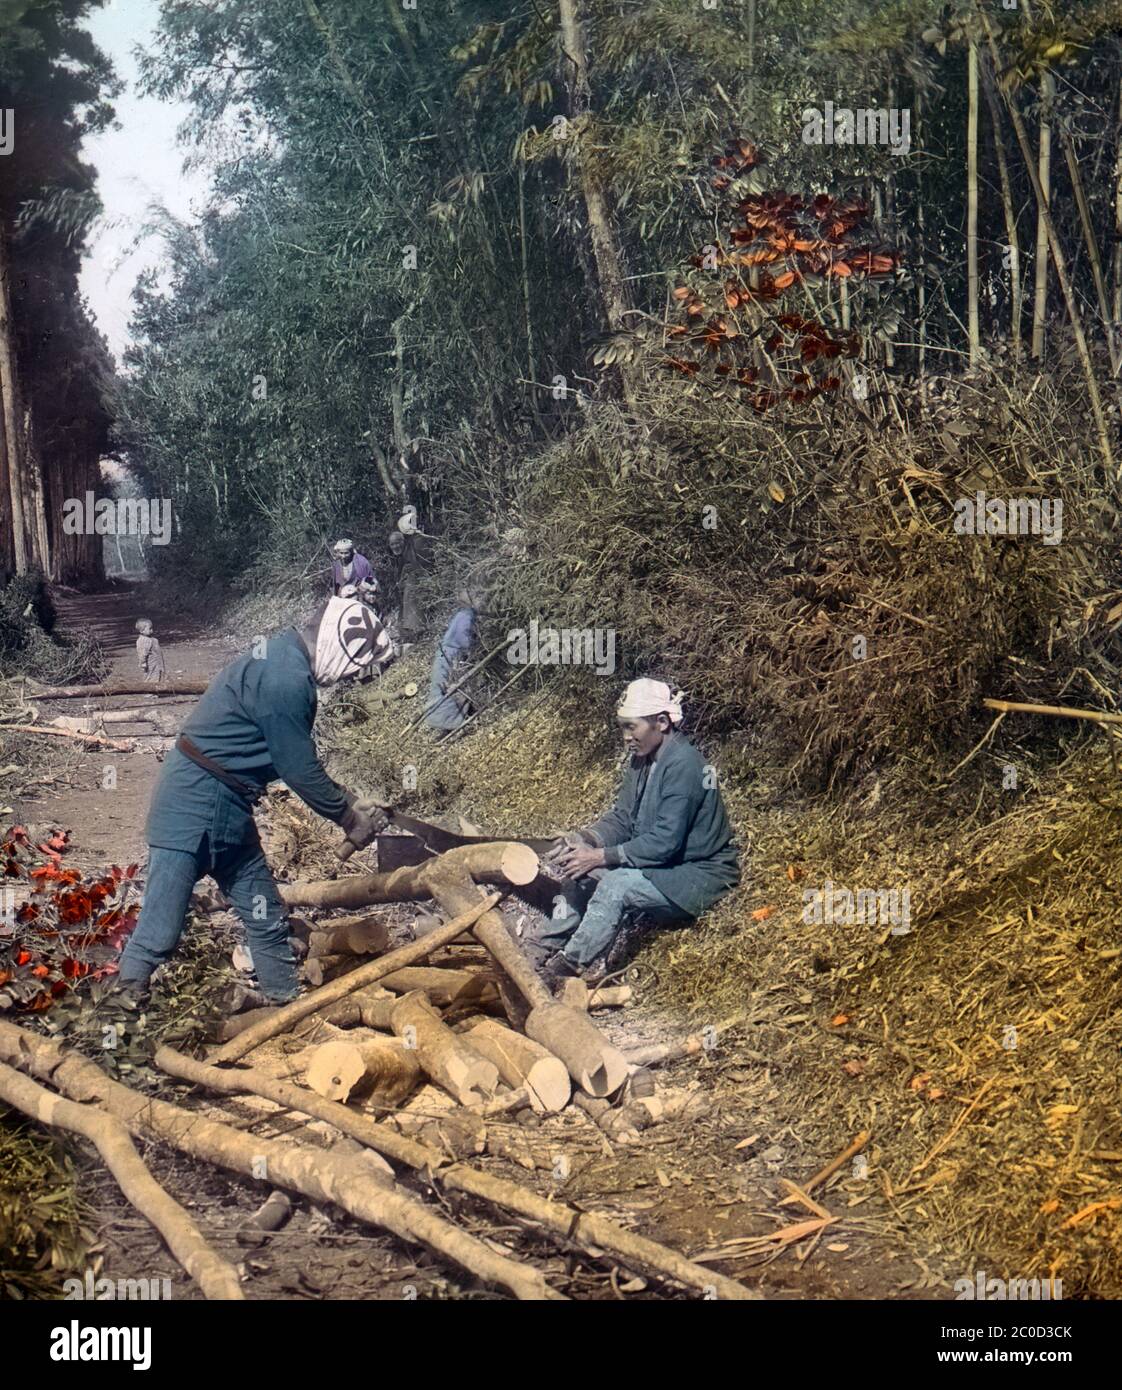 [ 1900s Japan - Cutting Firewood ] — Cutting firewood in the Japanese countryside.  20th century vintage glass slide. Stock Photo